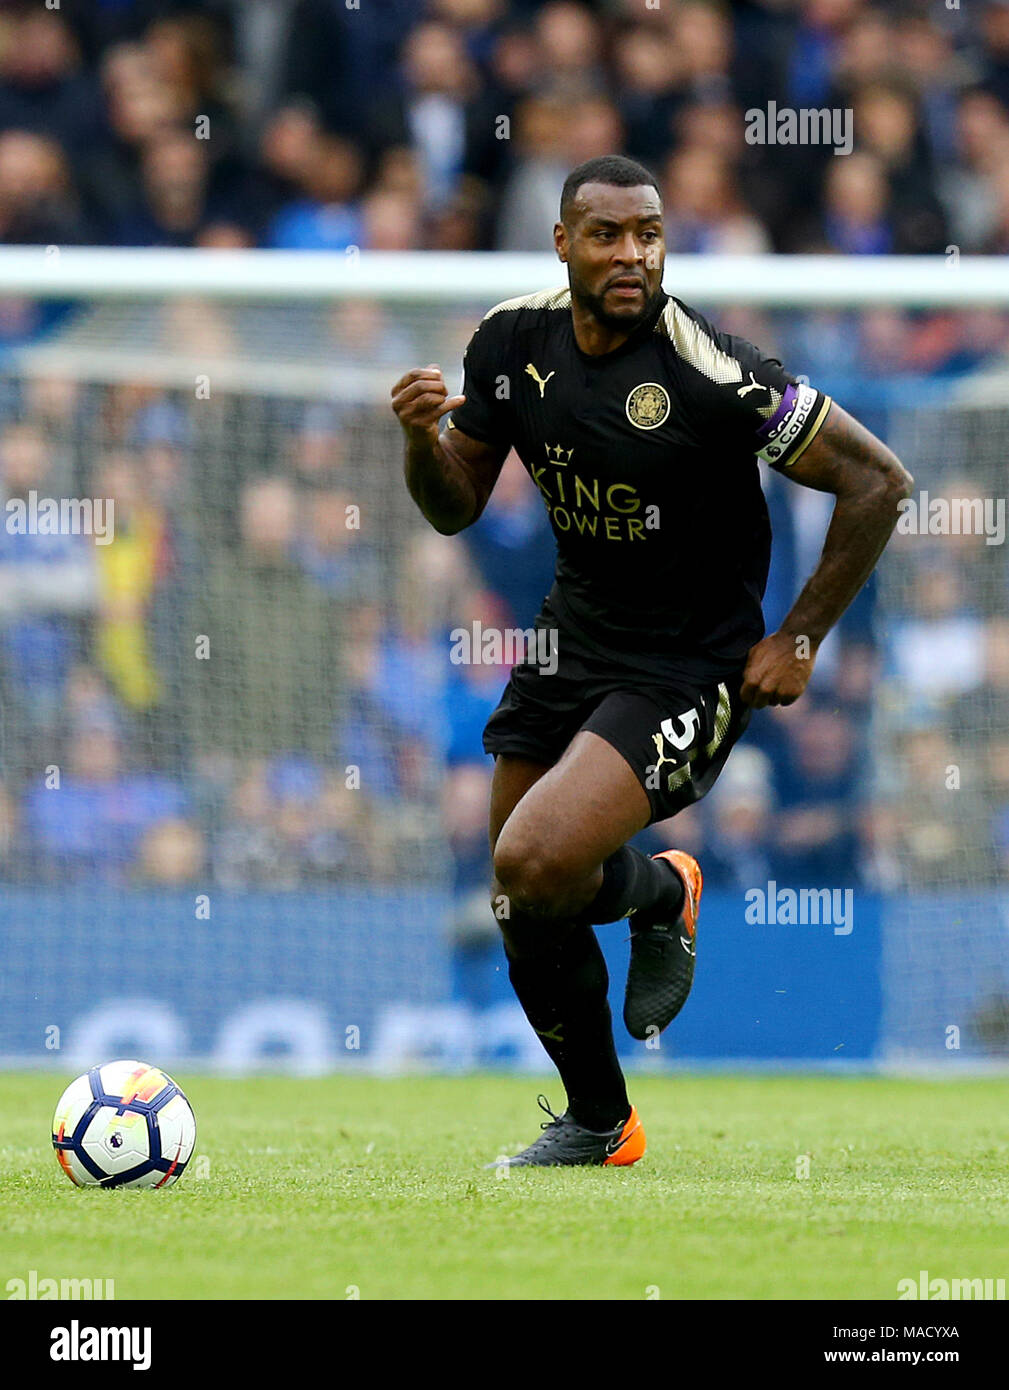 Leicester City's Wes Morgan during the Premier League match at the AMEX Stadium, Brighton. PRESS ASSOCIATION Photo. Picture date: Saturday March 31, 2018. See PA story SOCCER Brighton. Photo credit should read: Gareth Fuller/PA Wire. RESTRICTIONS: No use with unauthorised audio, video, data, fixture lists, club/league logos or 'live' services. Online in-match use limited to 75 images, no video emulation. No use in betting, games or single club/league/player publications. Stock Photo